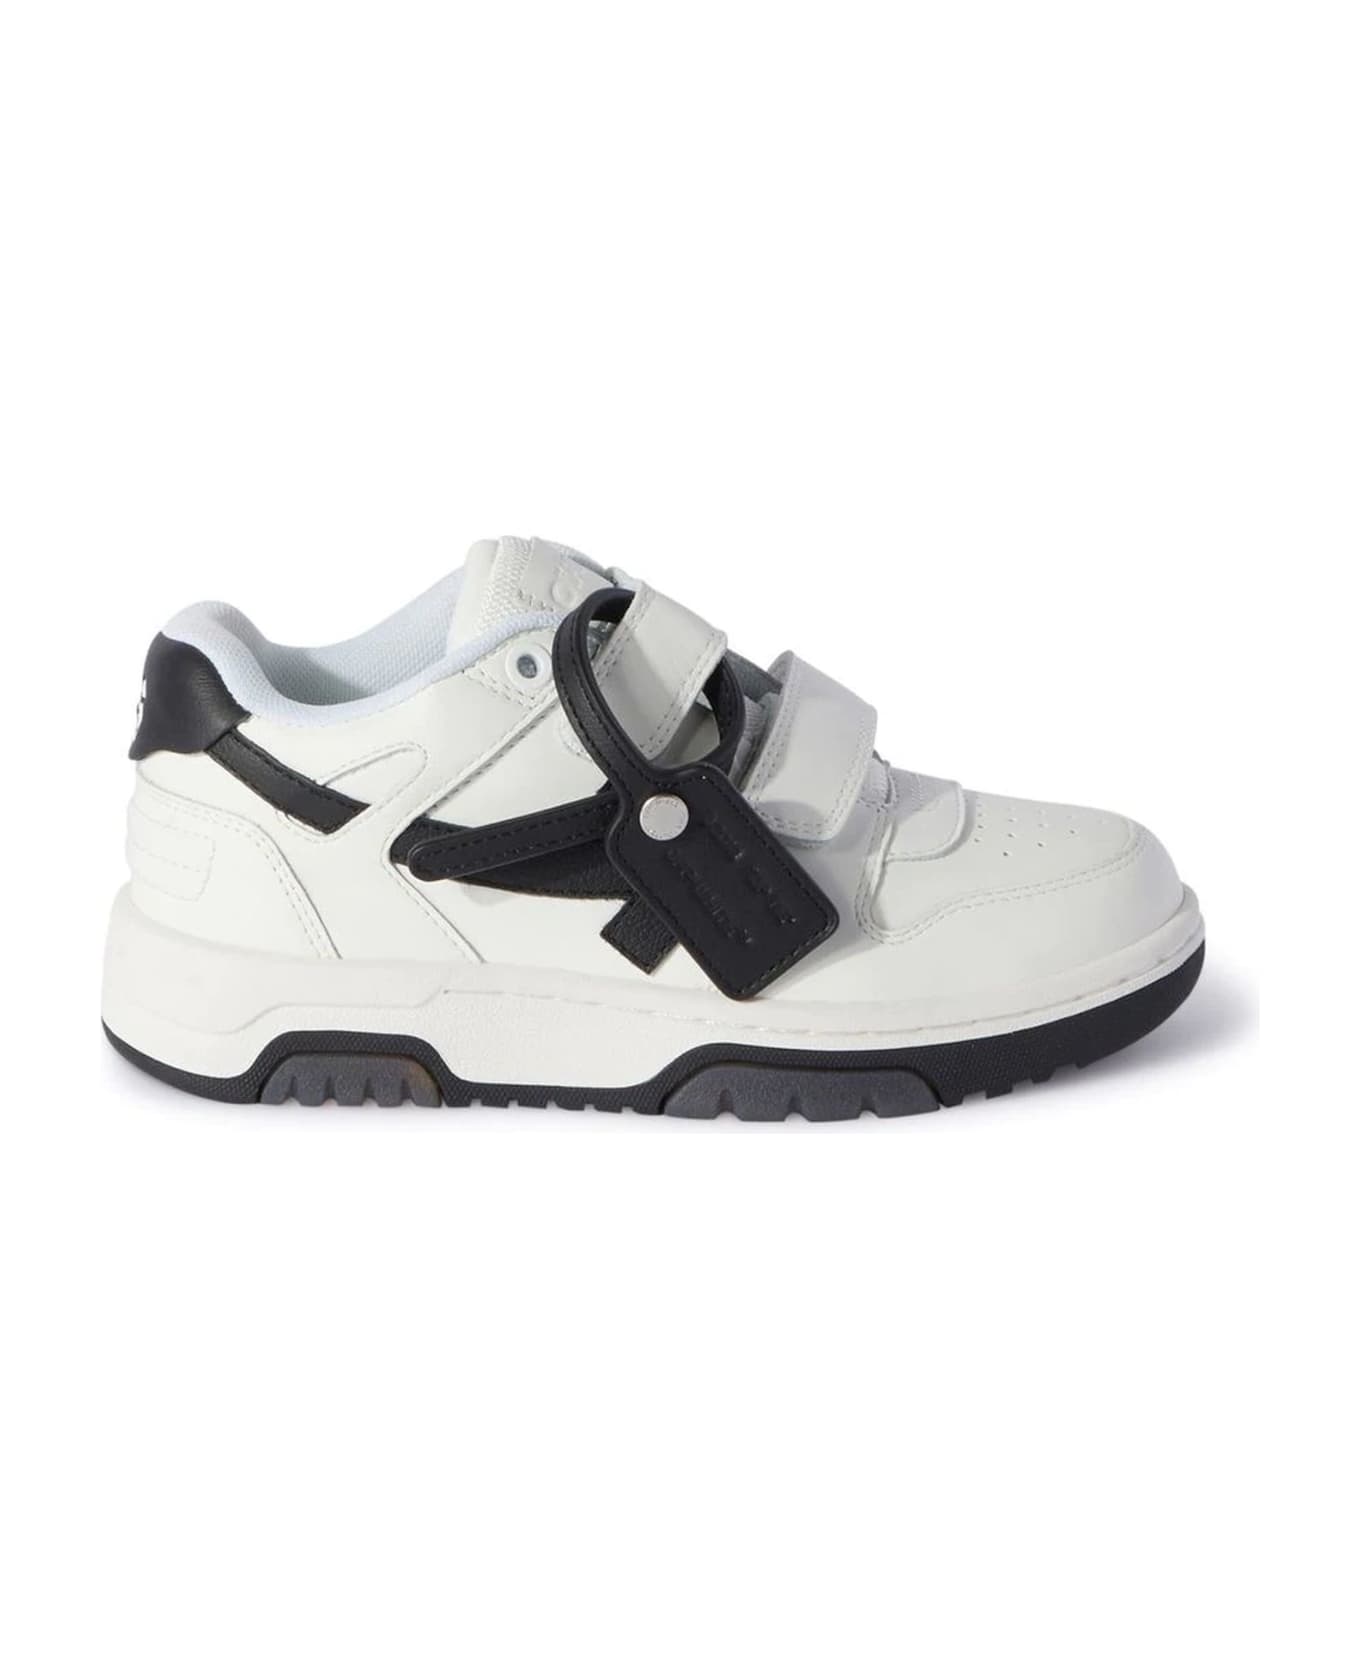 Off-White White Leather Sneakers - Bianco シューズ